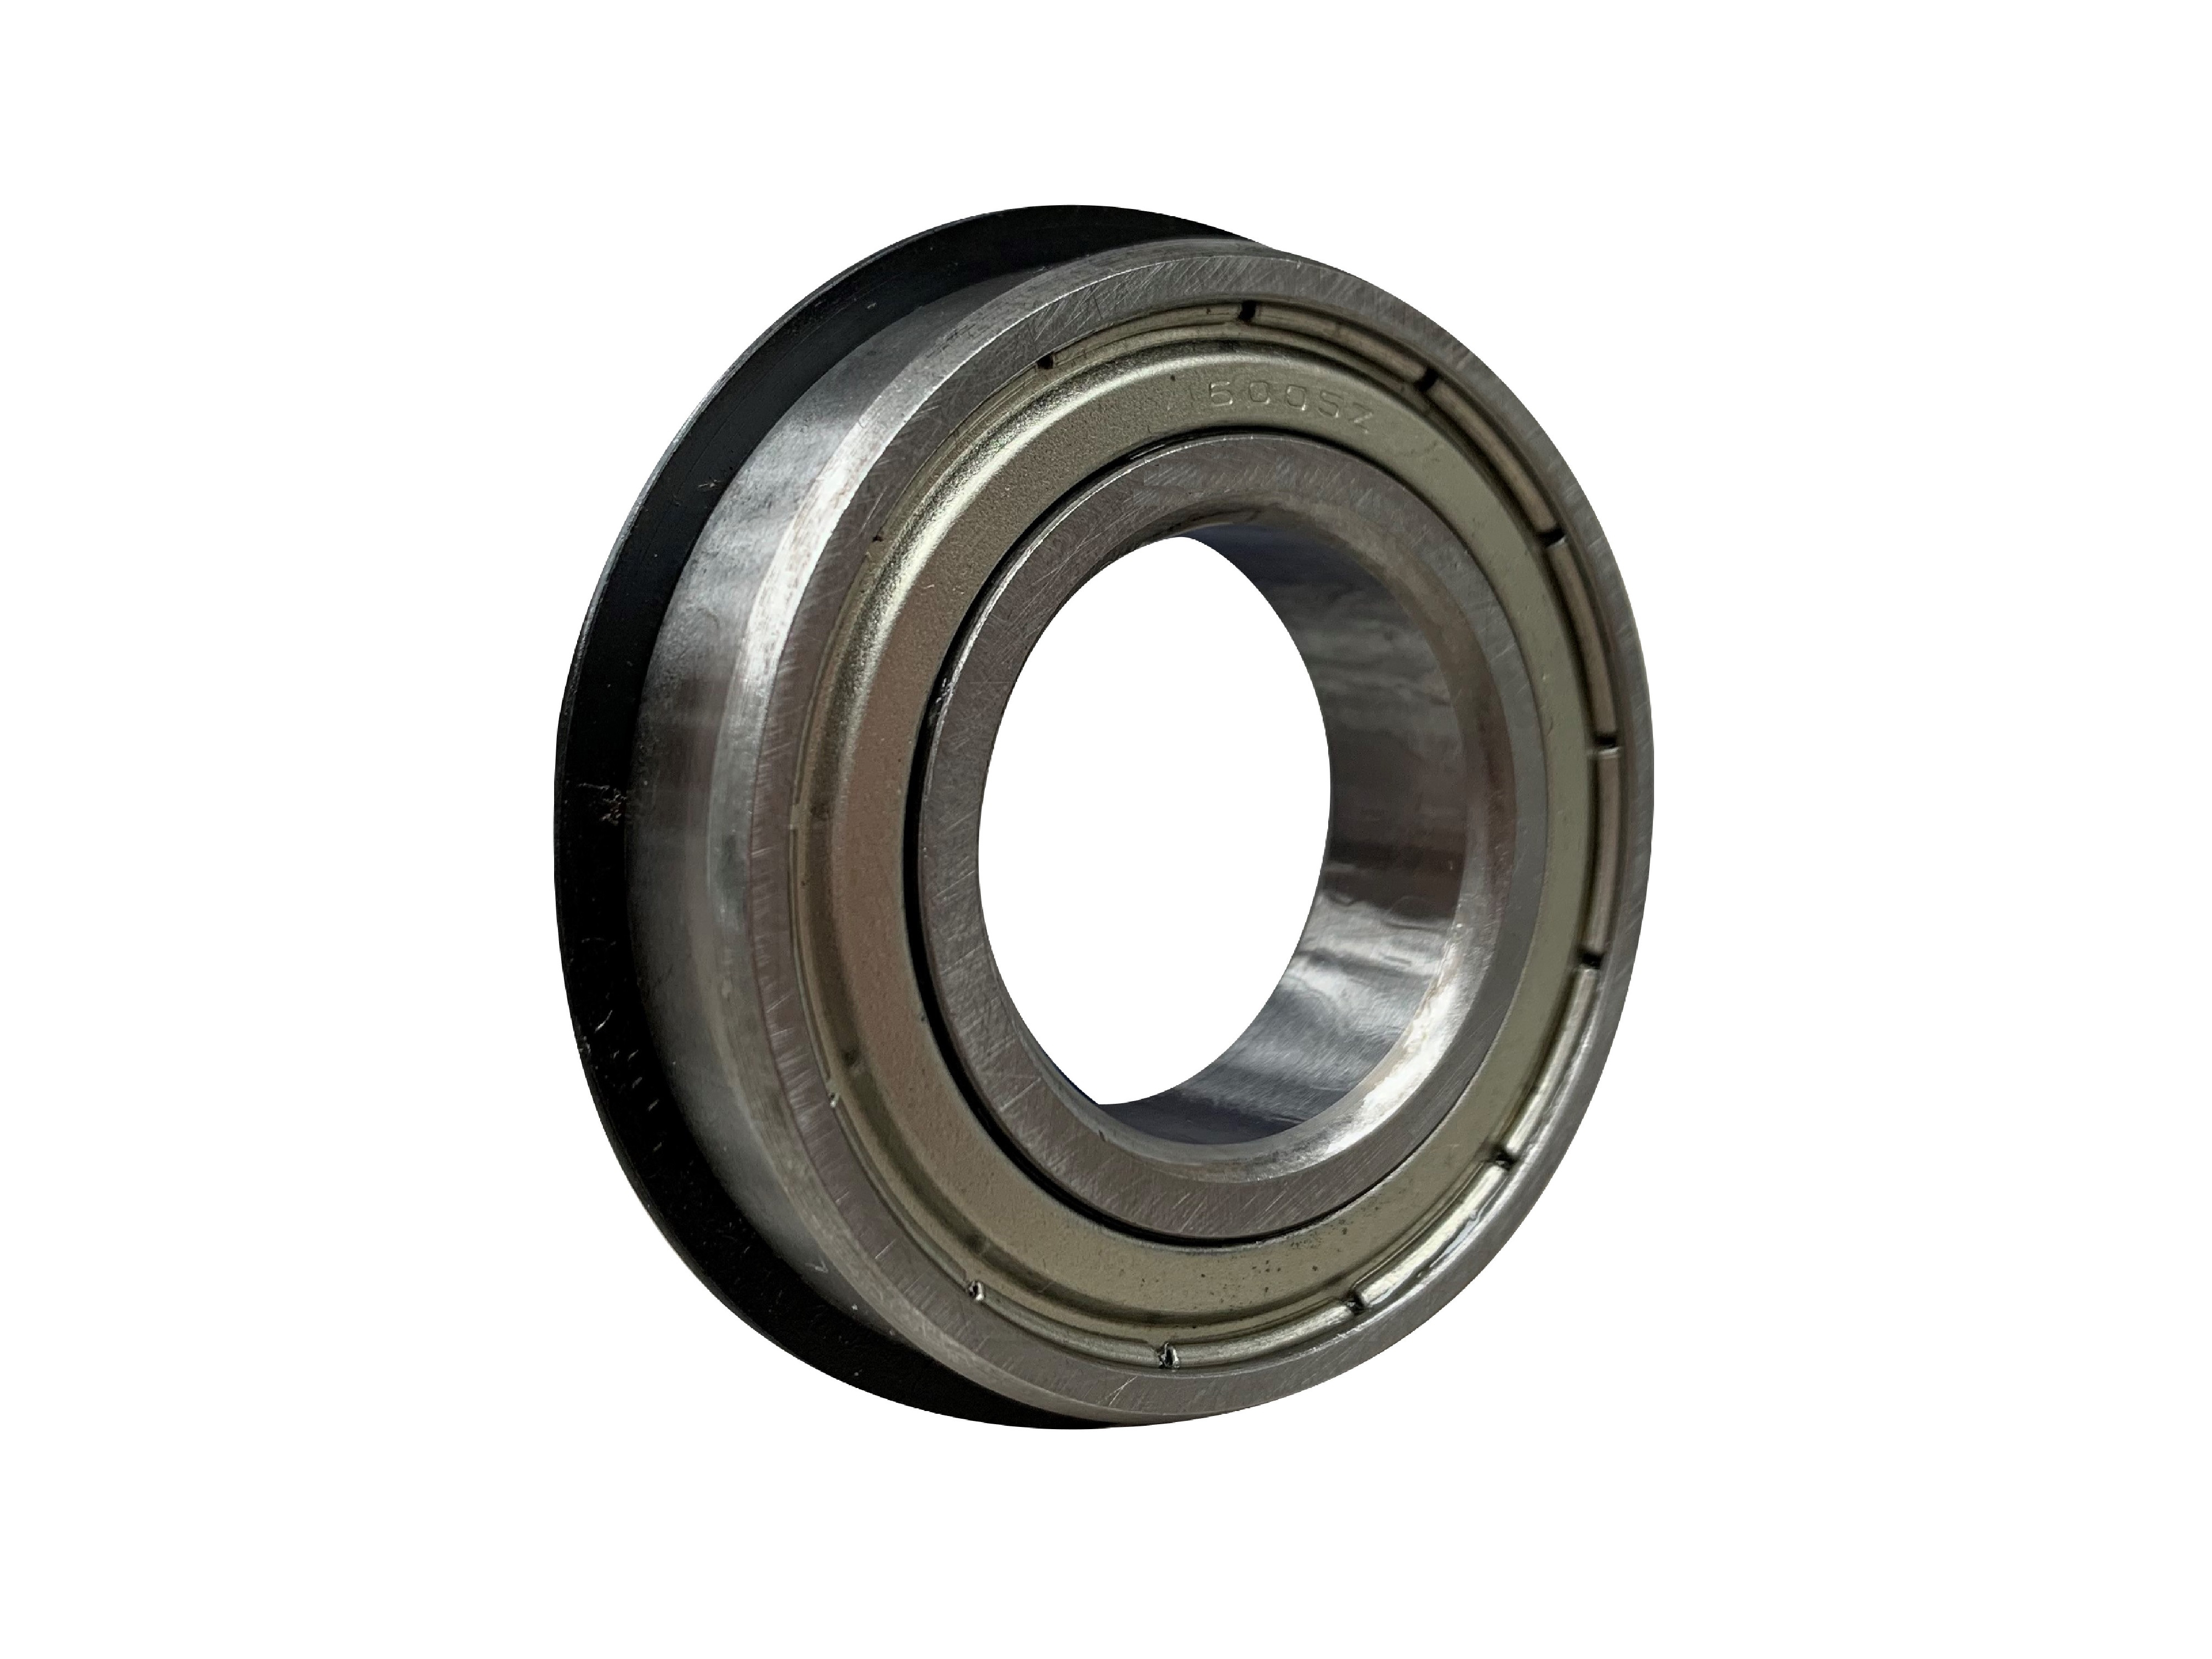 SKF 6205-2ZNR Shielded Ball Bearing With Snap Ring 25mm x 52mm x 15mm